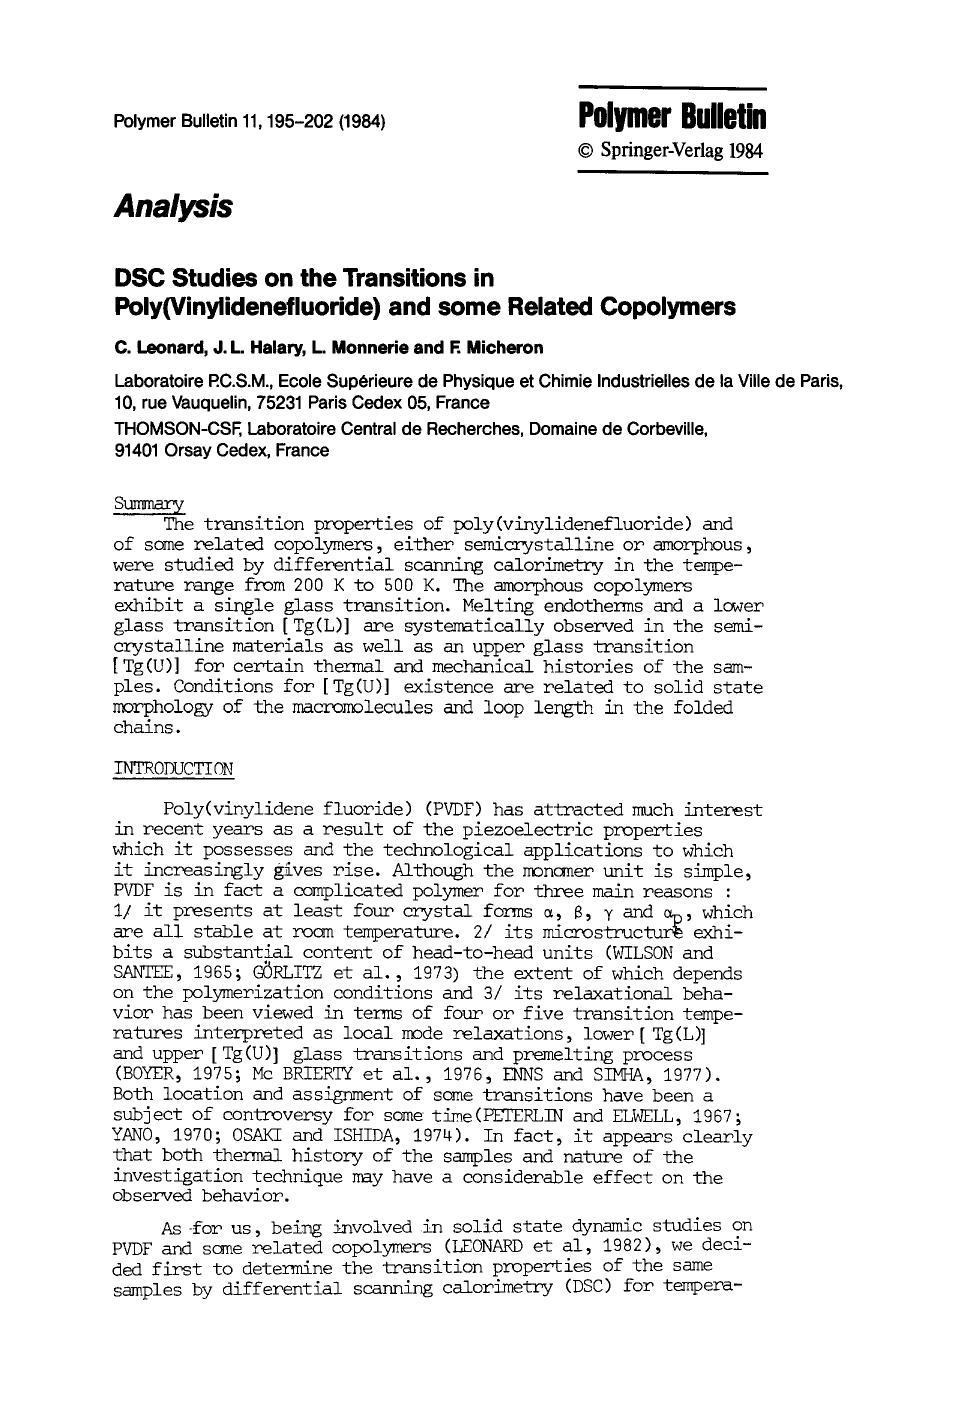 DSC studies on the transitions in poly(vinylidenefluoride) and some related copolymers by Unknown